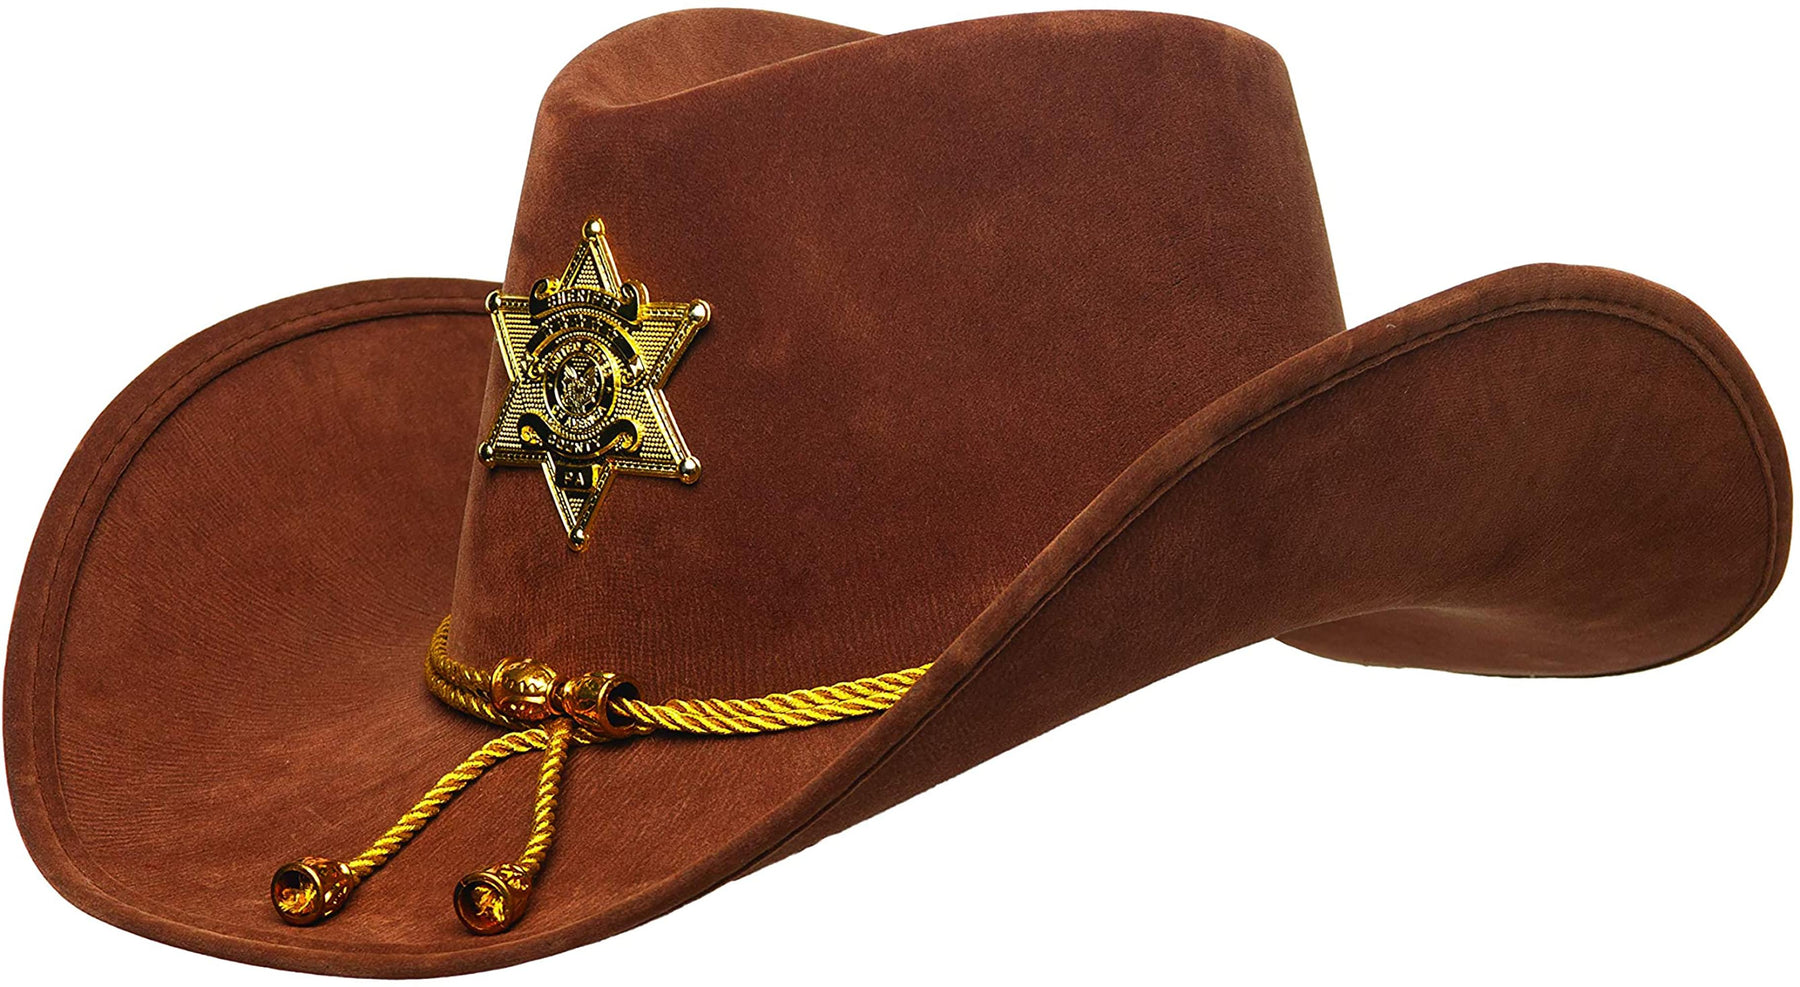 Brown Sheriff Hat with Gold Star & Tassels Adult Costume Accessory